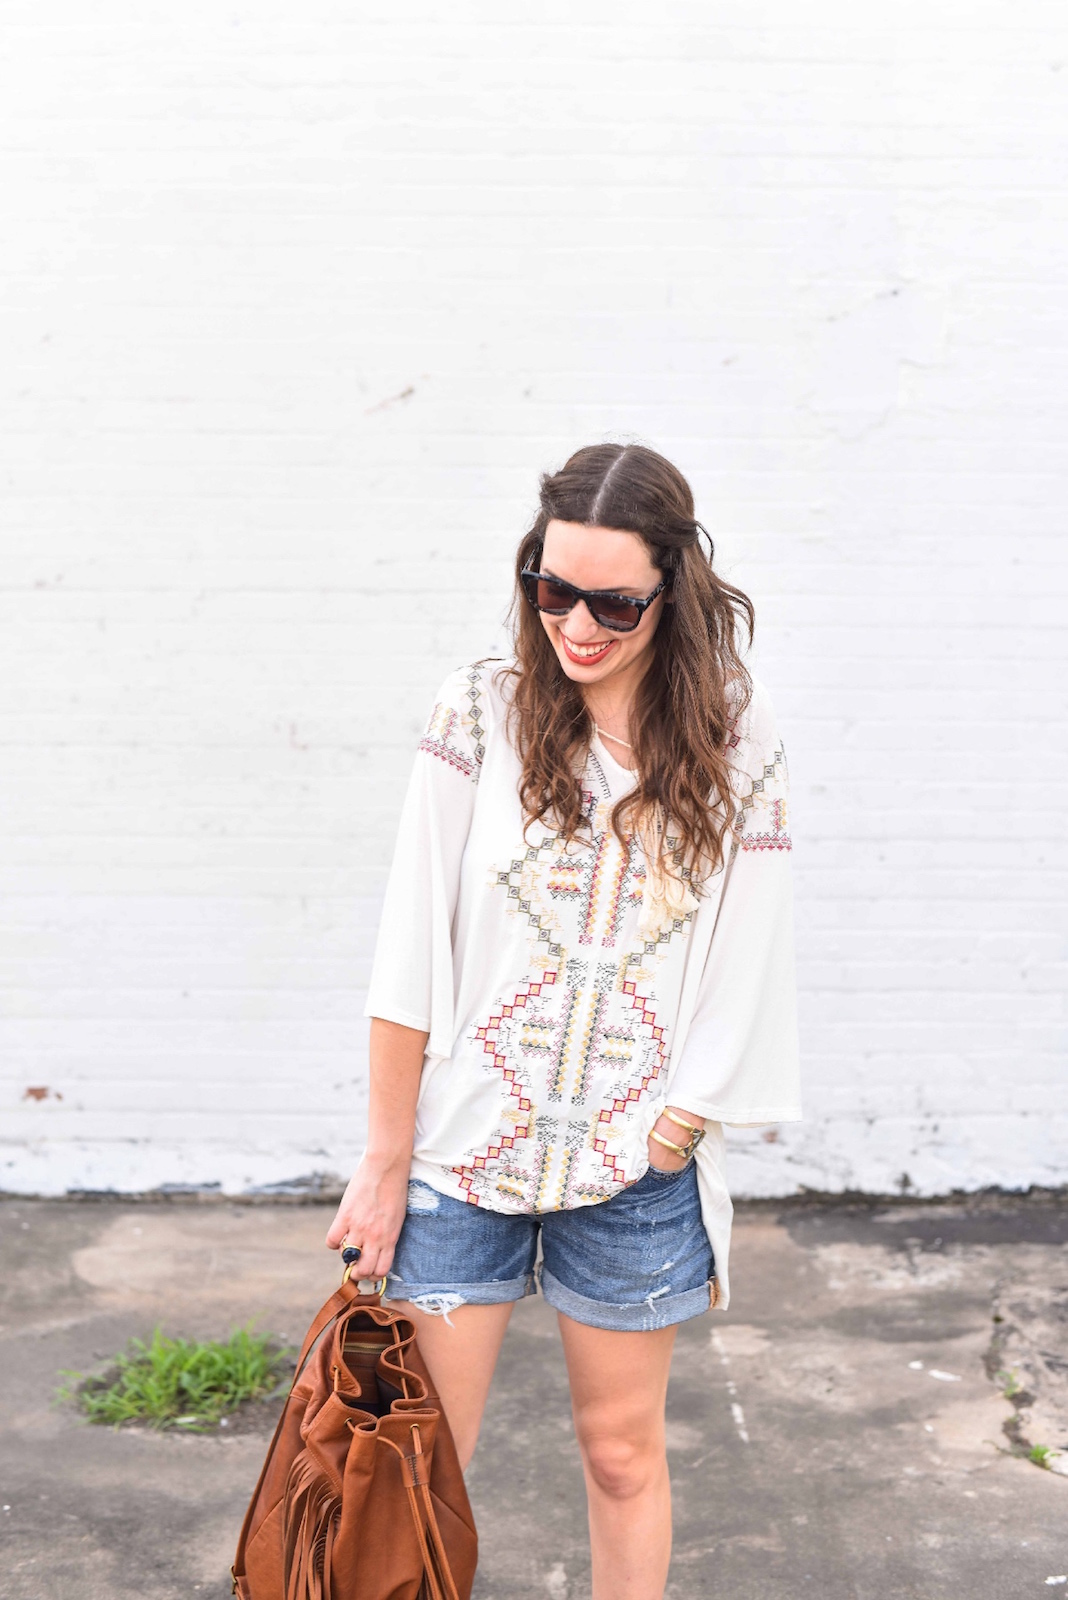 true religion fringe backpack, embroidered boho top, levis distressed shorts, lone star looking glass, houston fashion blogger, weekend outfit inspiration